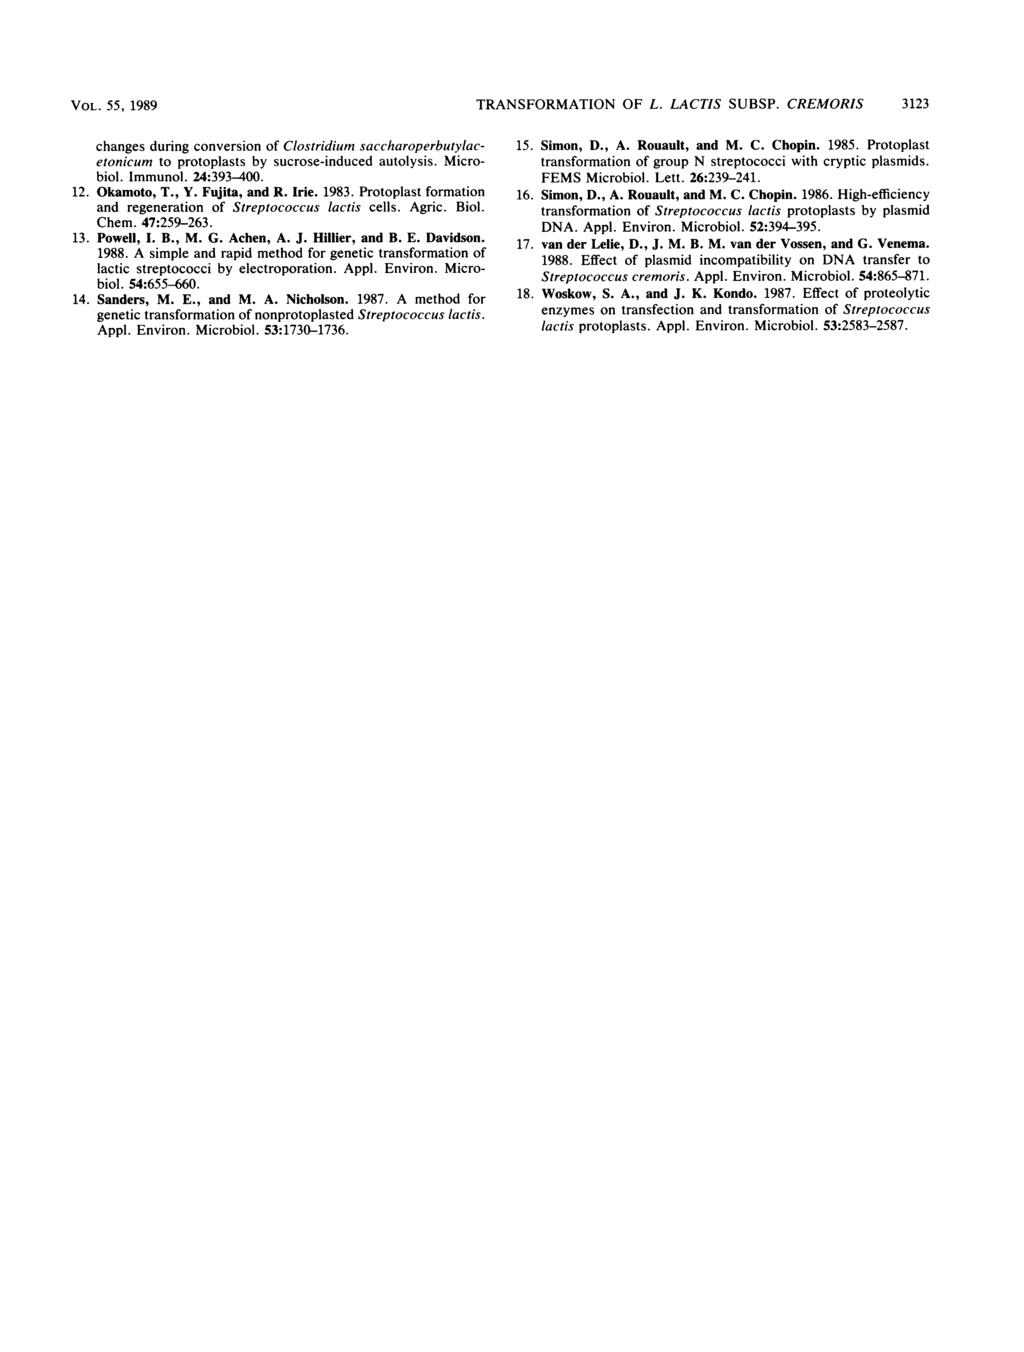 VOL. 55, 1989 TRANSFORMATION OF L. LACTIS SUBSP. CRMORIS 3123 changes during conversion of Clostridium saccharoperbutylacetonicum to protoplasts by sucrose-induced autolysis. Microbiol. Immunol.